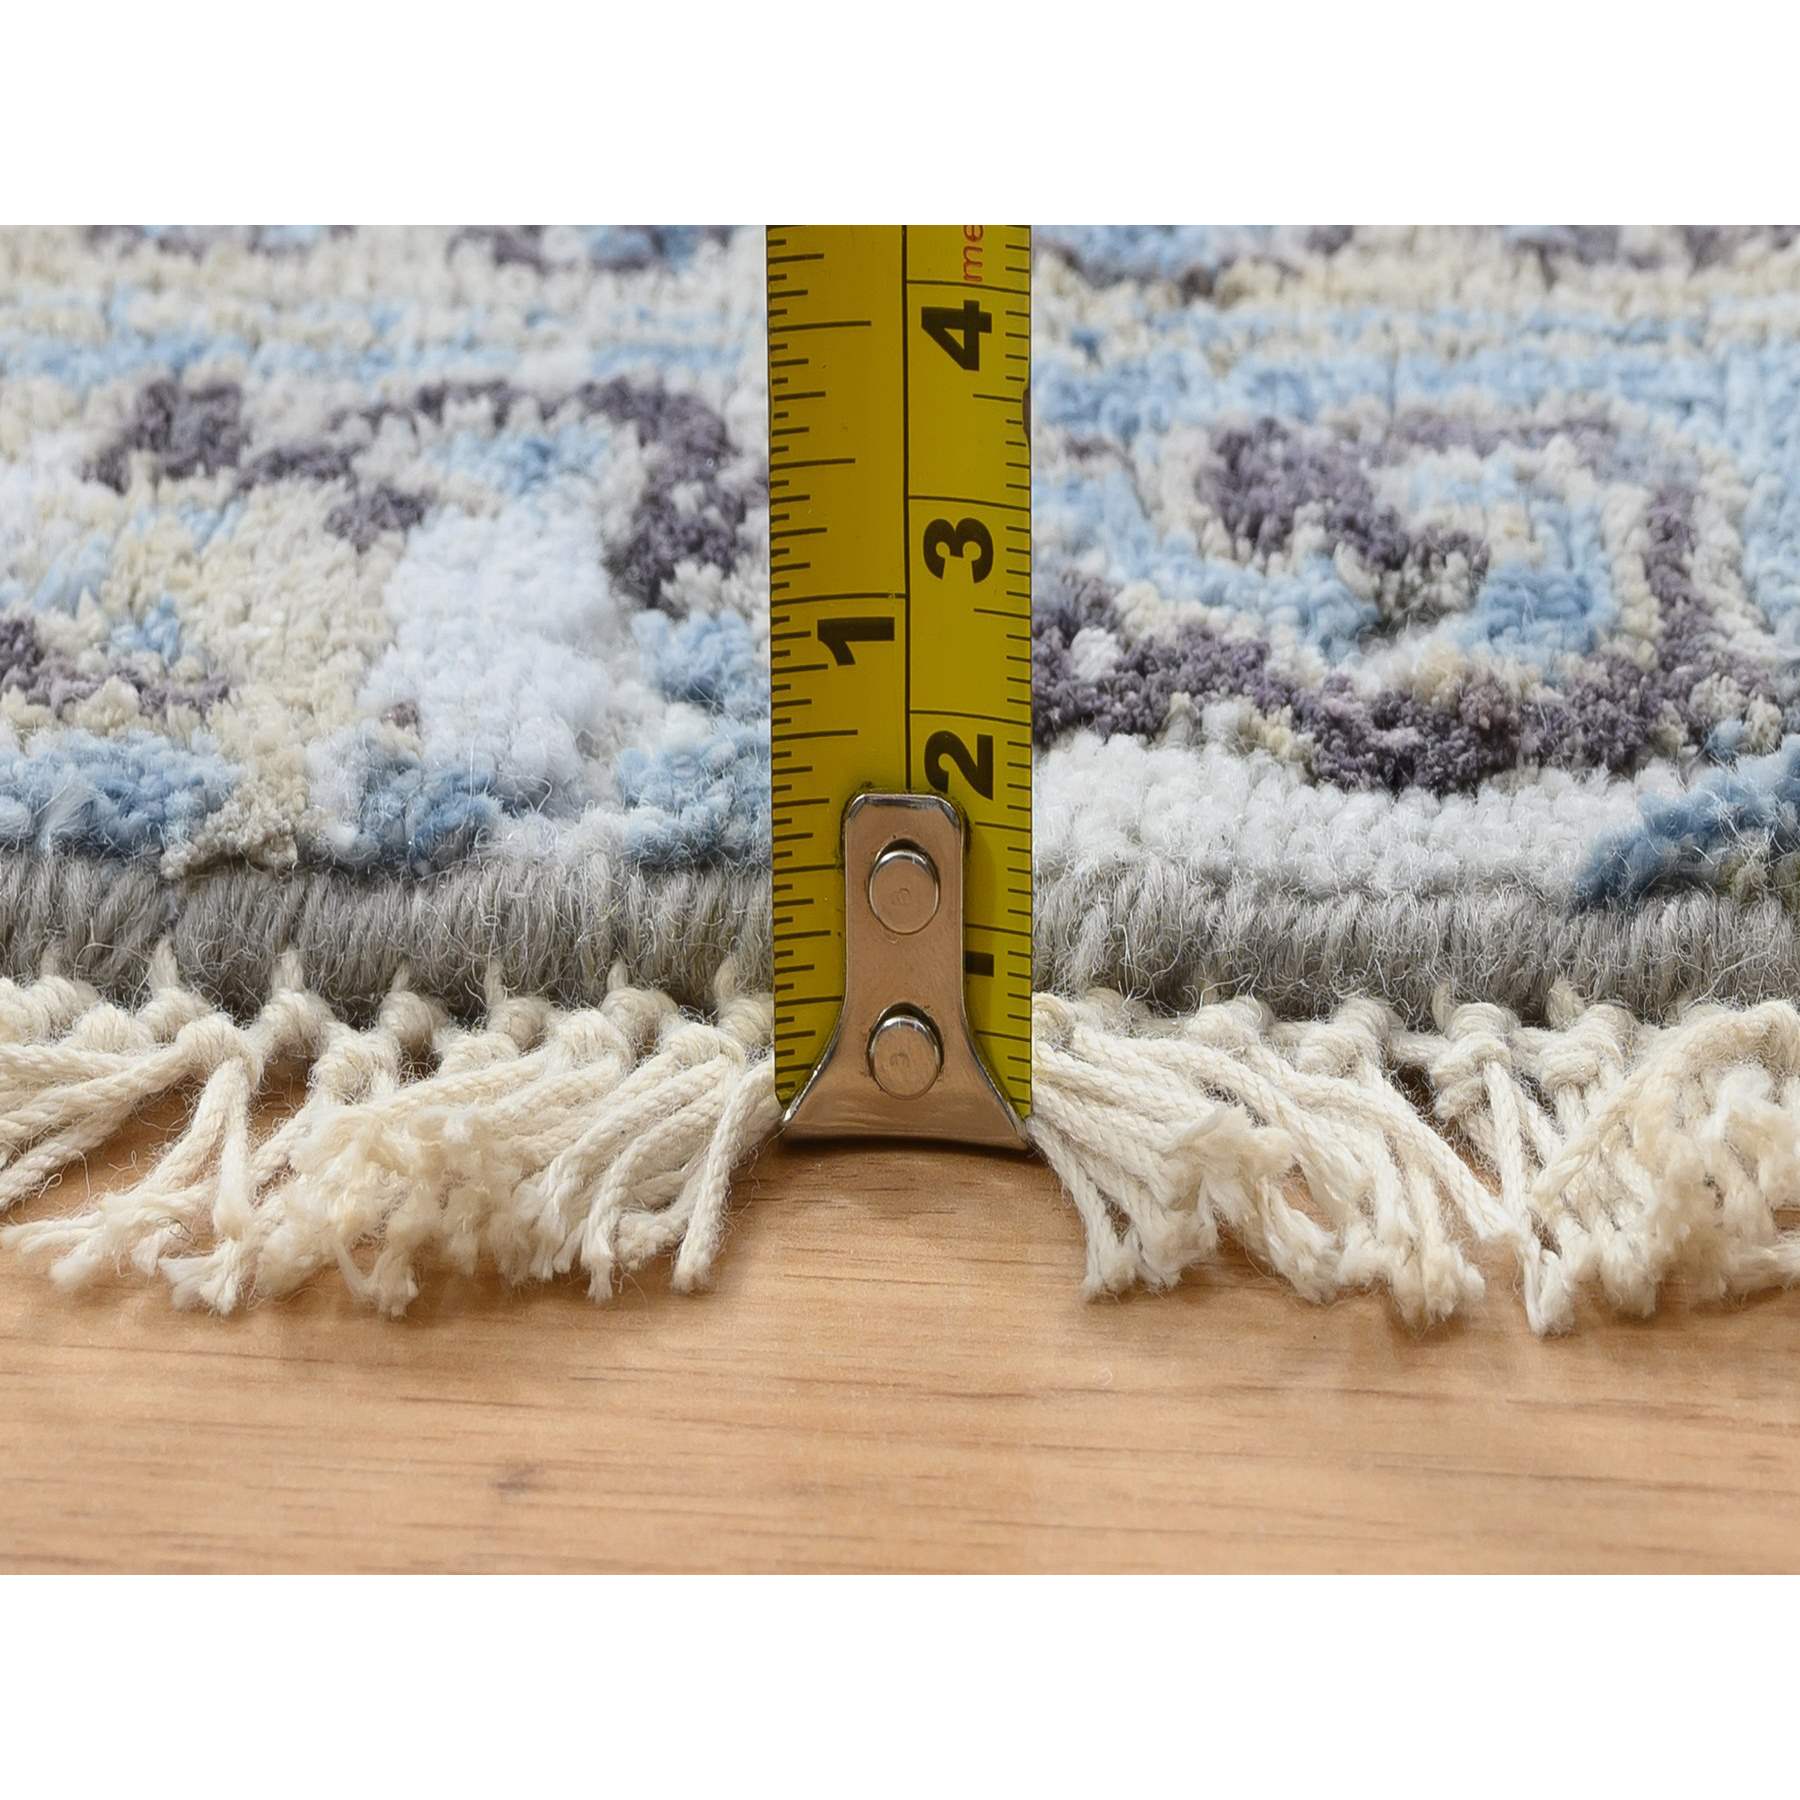 Transitional-Hand-Knotted-Rug-323035